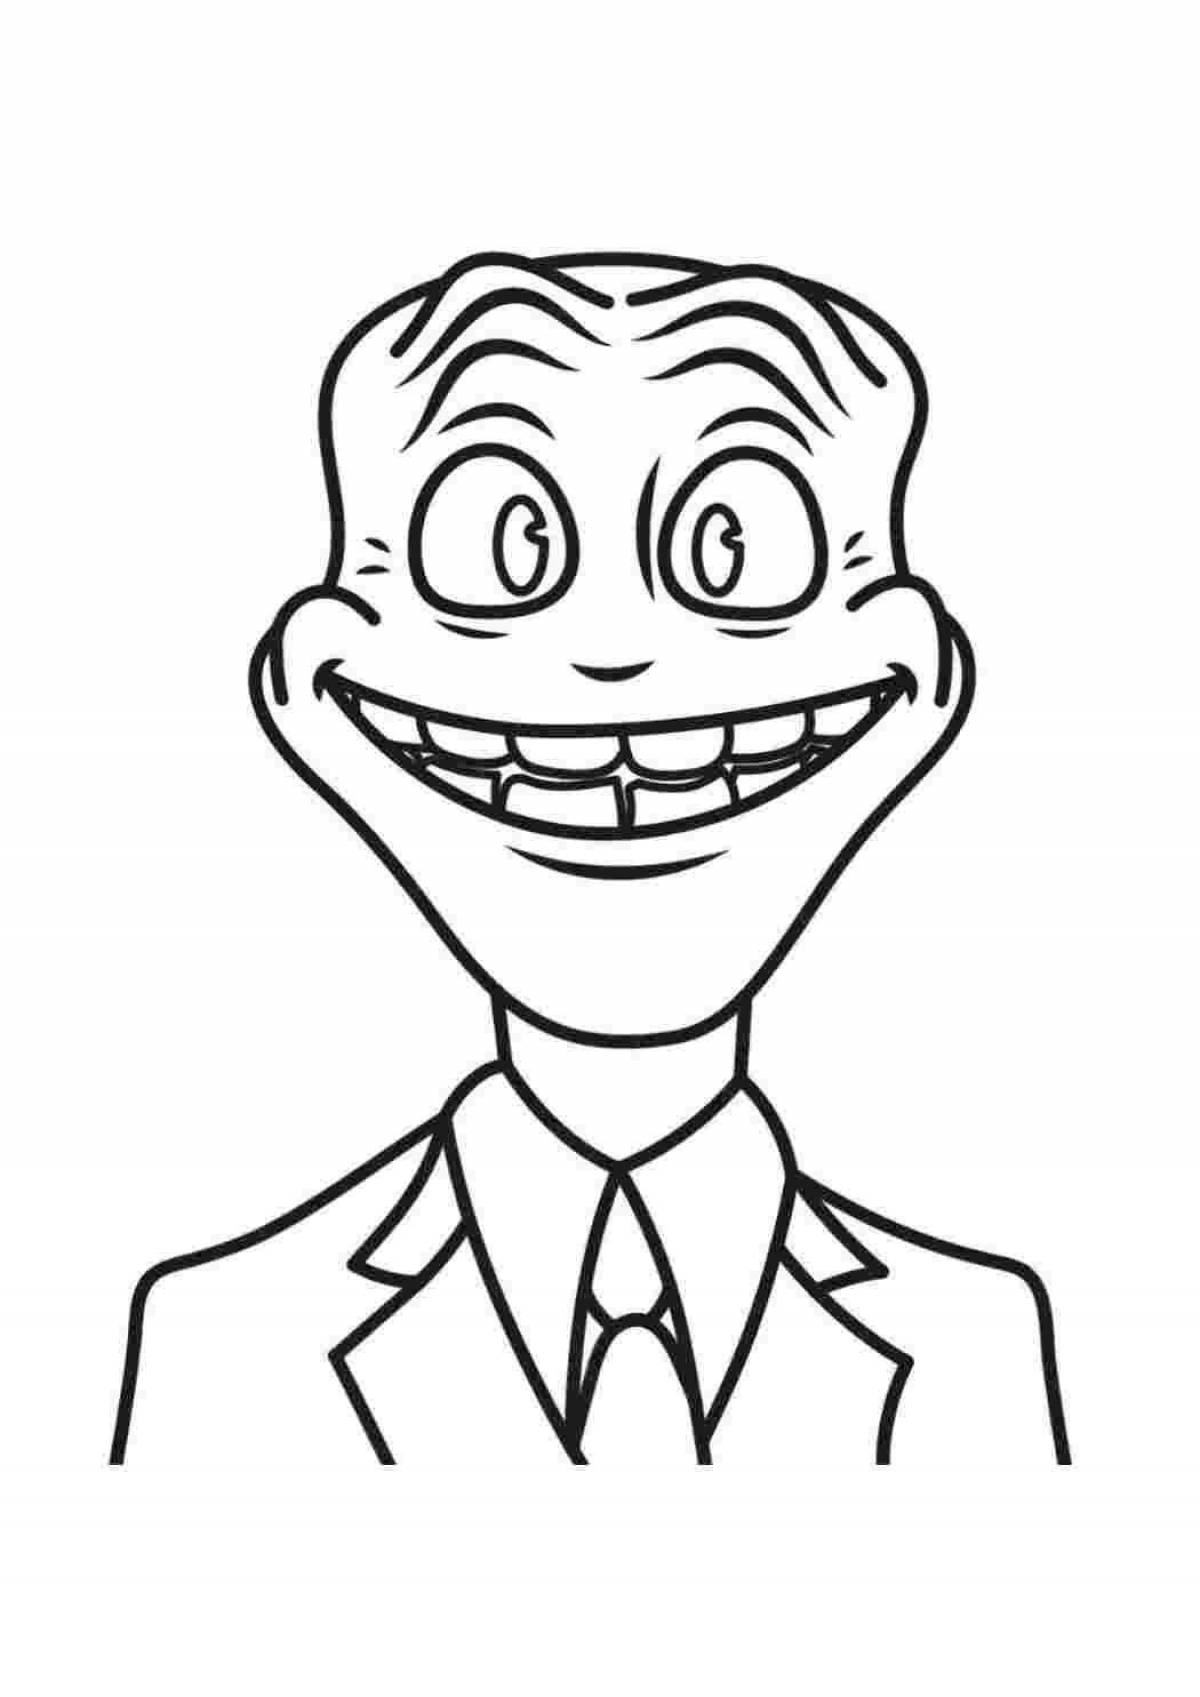 Jolly mr hobbs coloring page